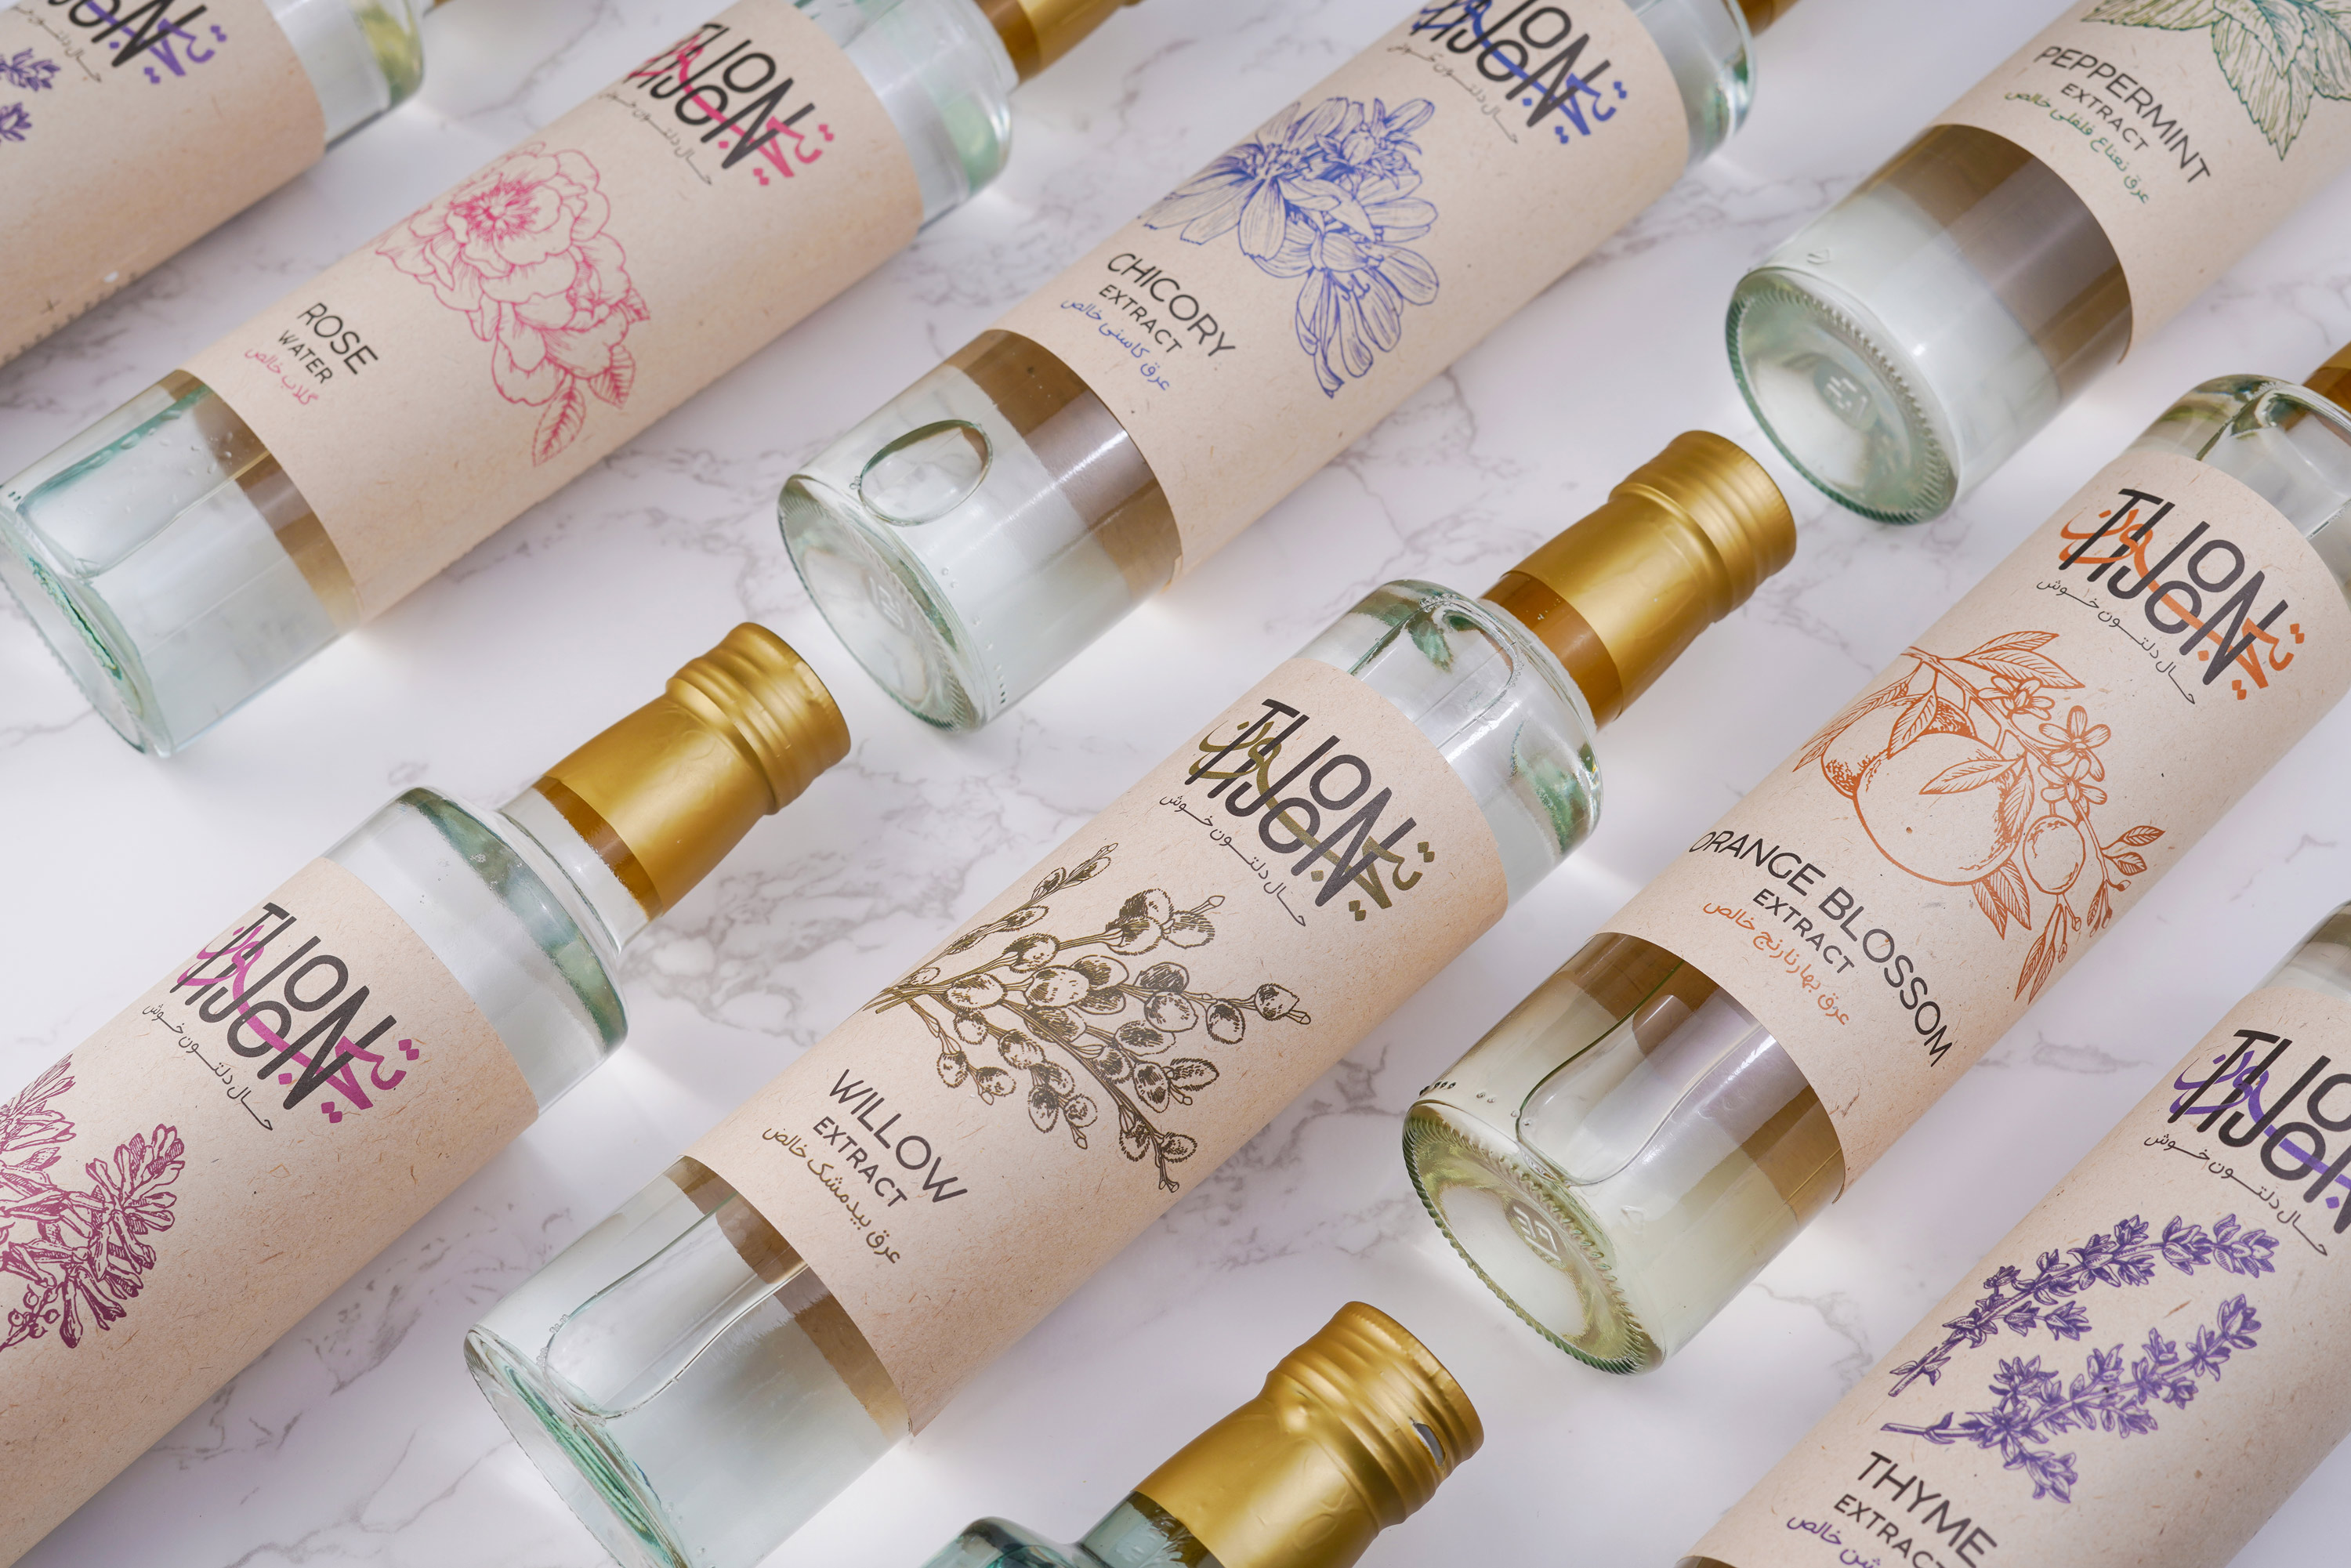 Tijoon Extracts Brand Label Design and Packaging